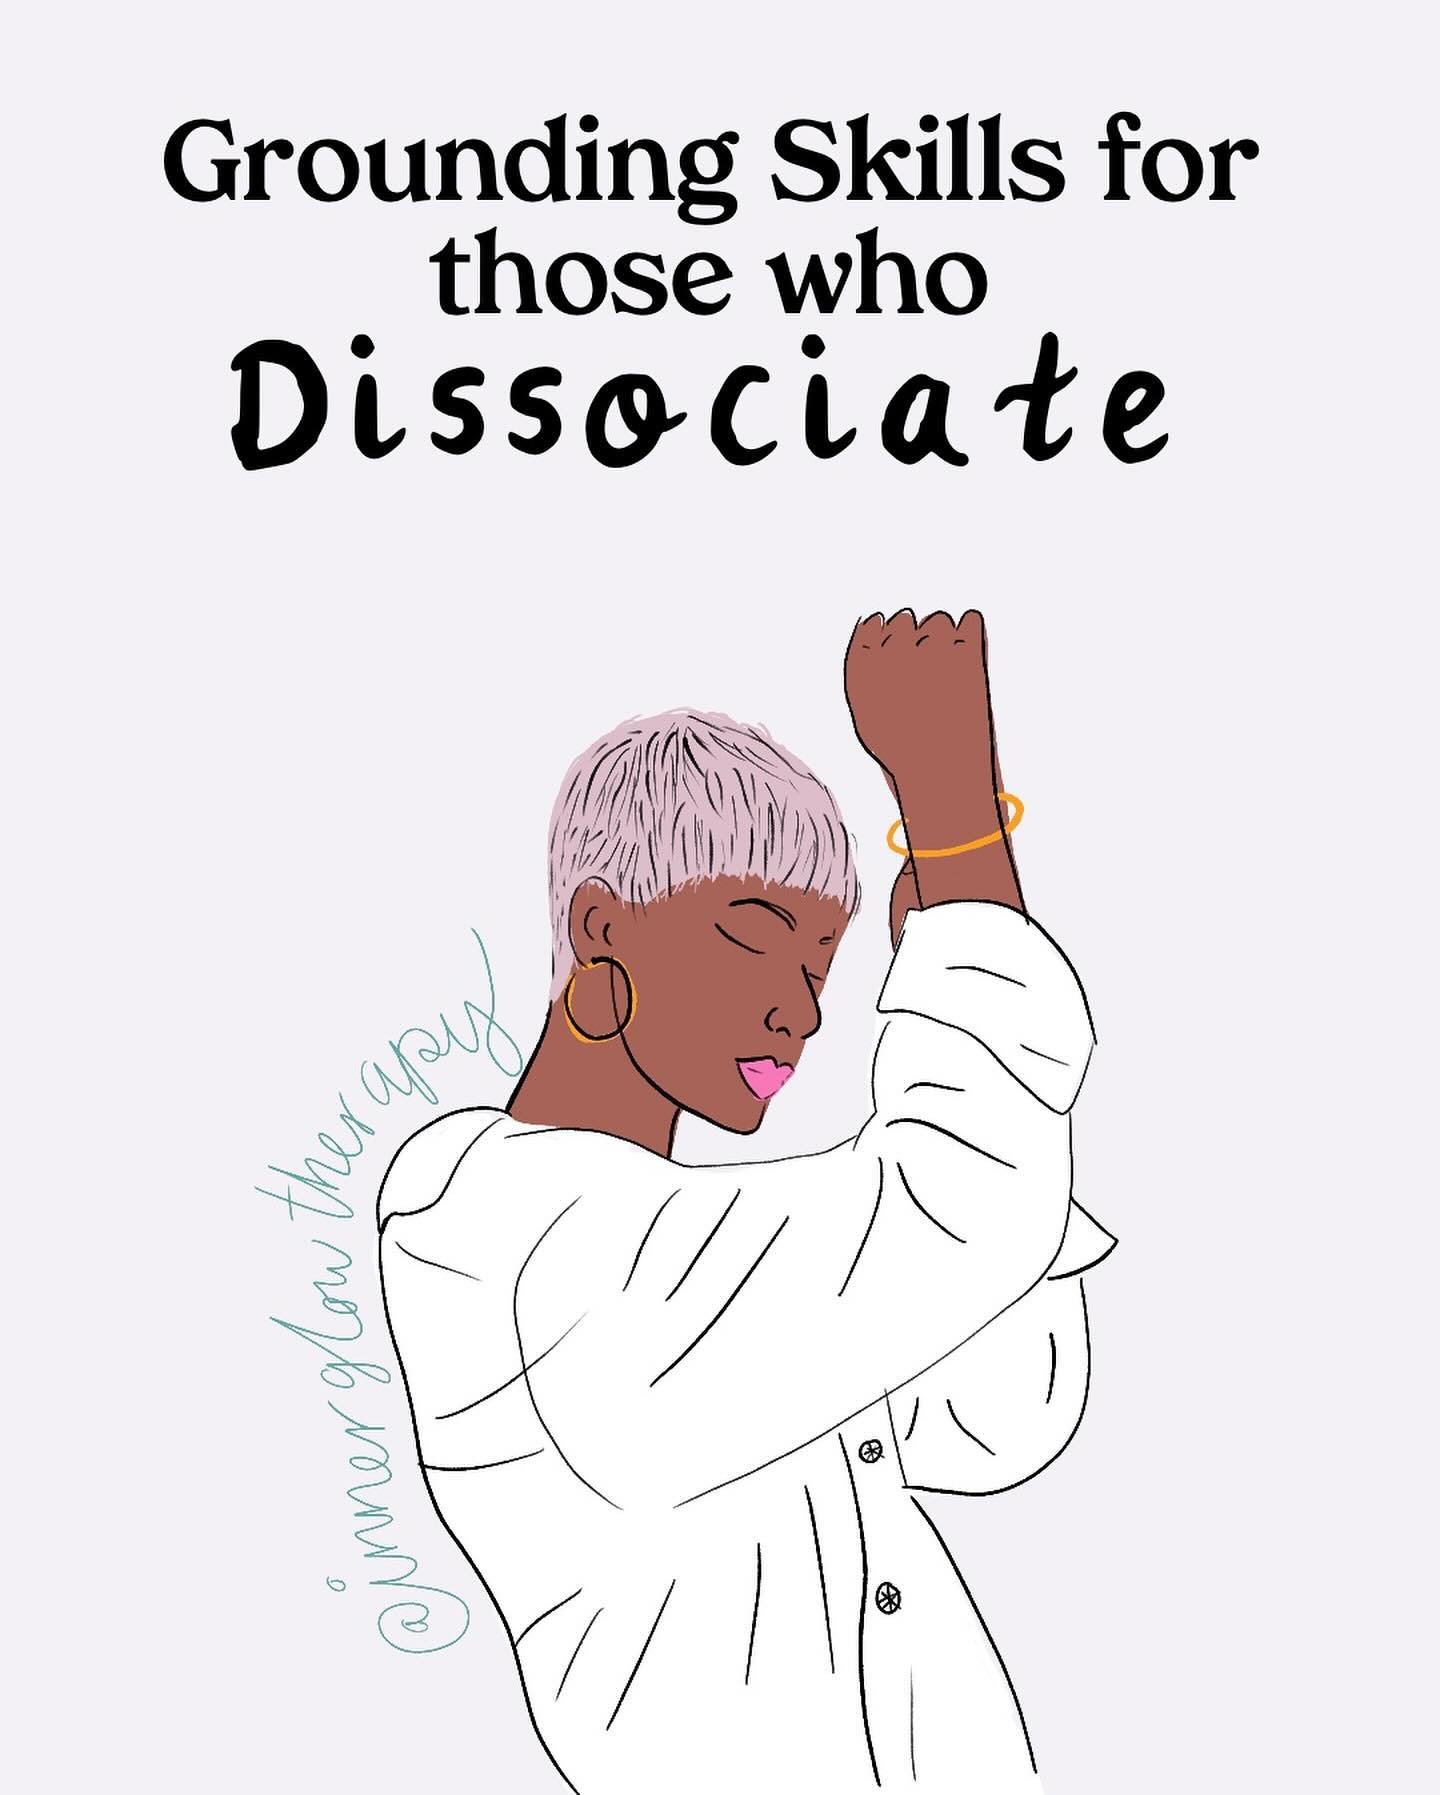 Dissociation is a protective strategy where you unconsciously detach from your body, emotions, memories or surroundings. 

It is normal to dissociate to some degree, all of us dissociates - for example, when I am drying my hair in the morning, i swit